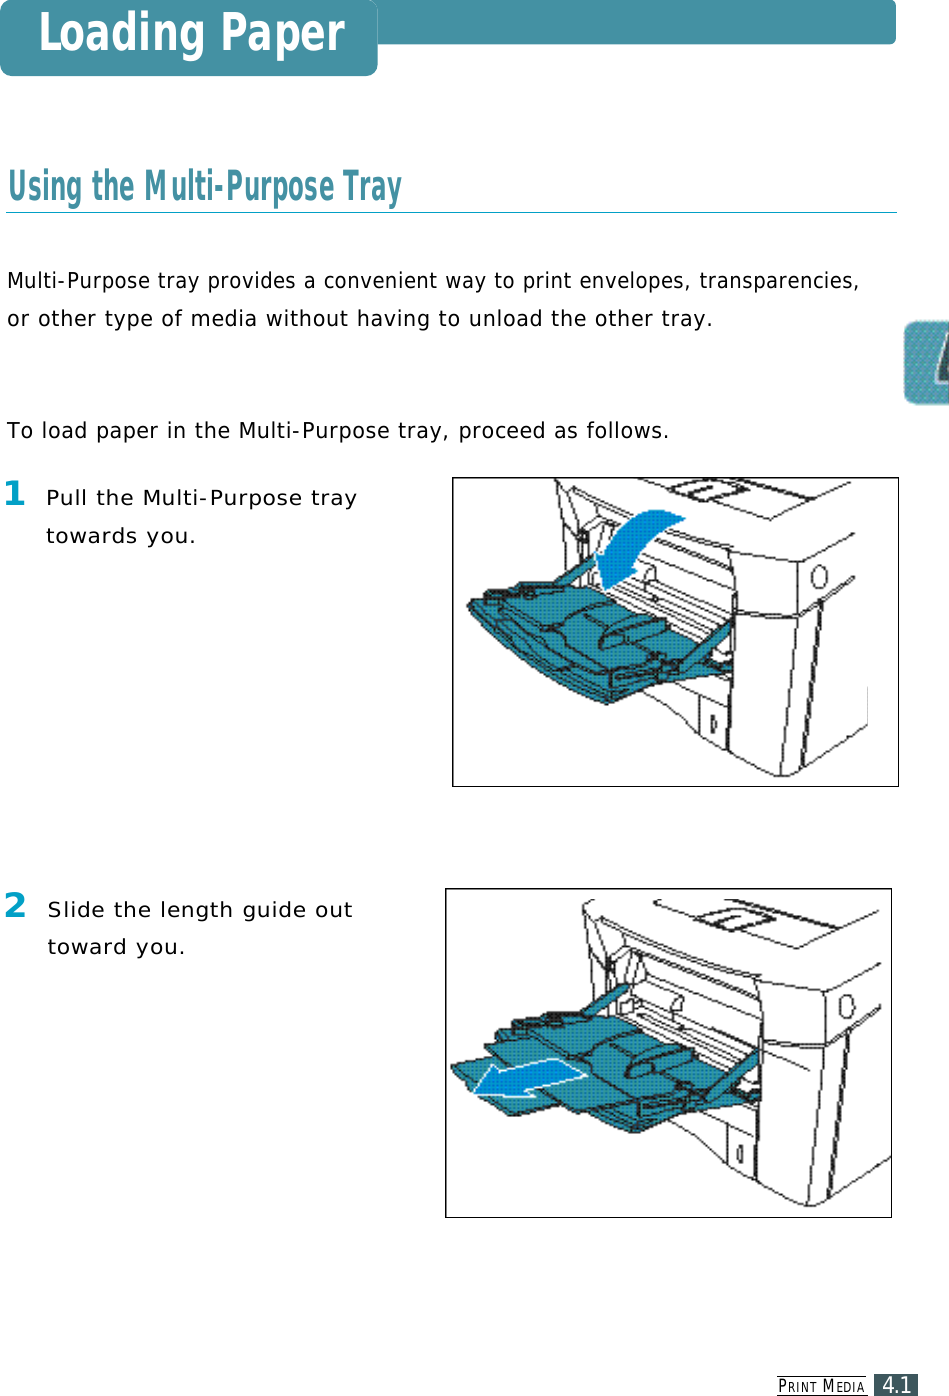 PR I N T ME D I A4.1Loading PaperMulti-Purpose tray provides a convenient way to print envelopes, transparencies, or other type of media without having to unload the other tray.To load paper in the Multi-Purpose tray, proceed as follows.Using the Multi-Purpose Tray1Pull the Multi-Purpose trayt o wards yo u .2Slide the length guide outt o ward yo u .